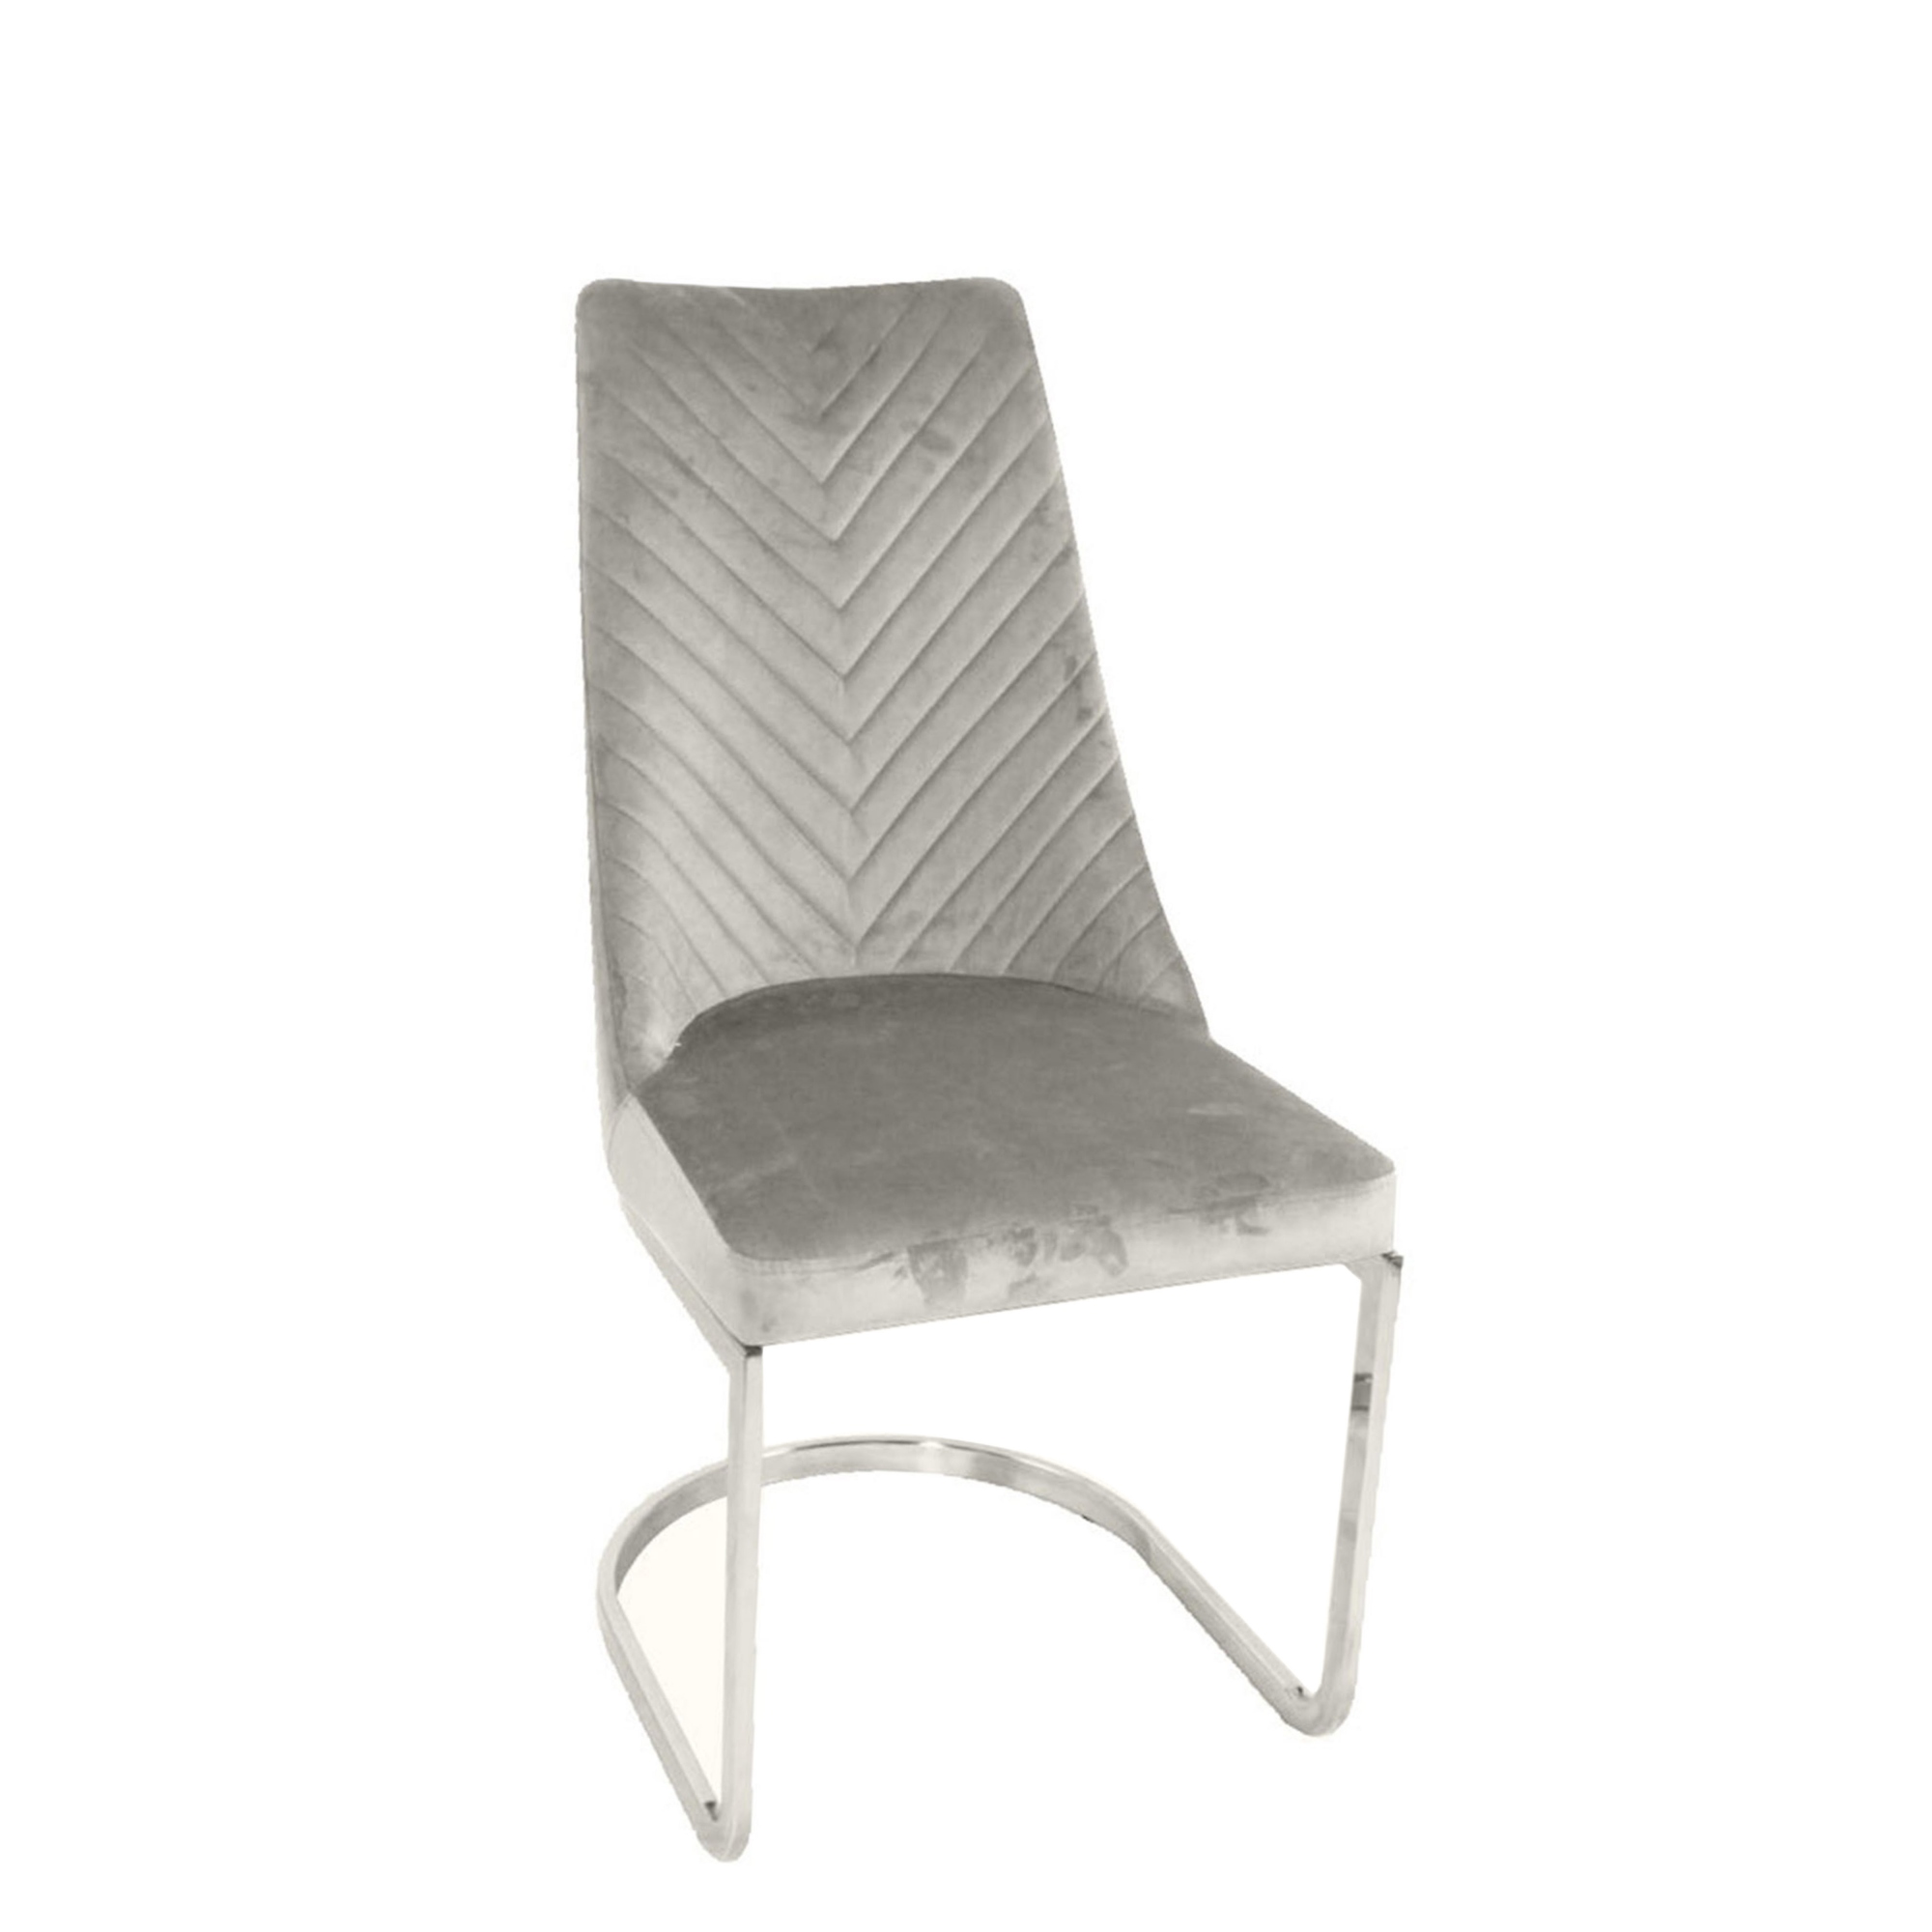 Phoebe - Dining Chair In Light Grey Velvet Fabric - Dining Chairs